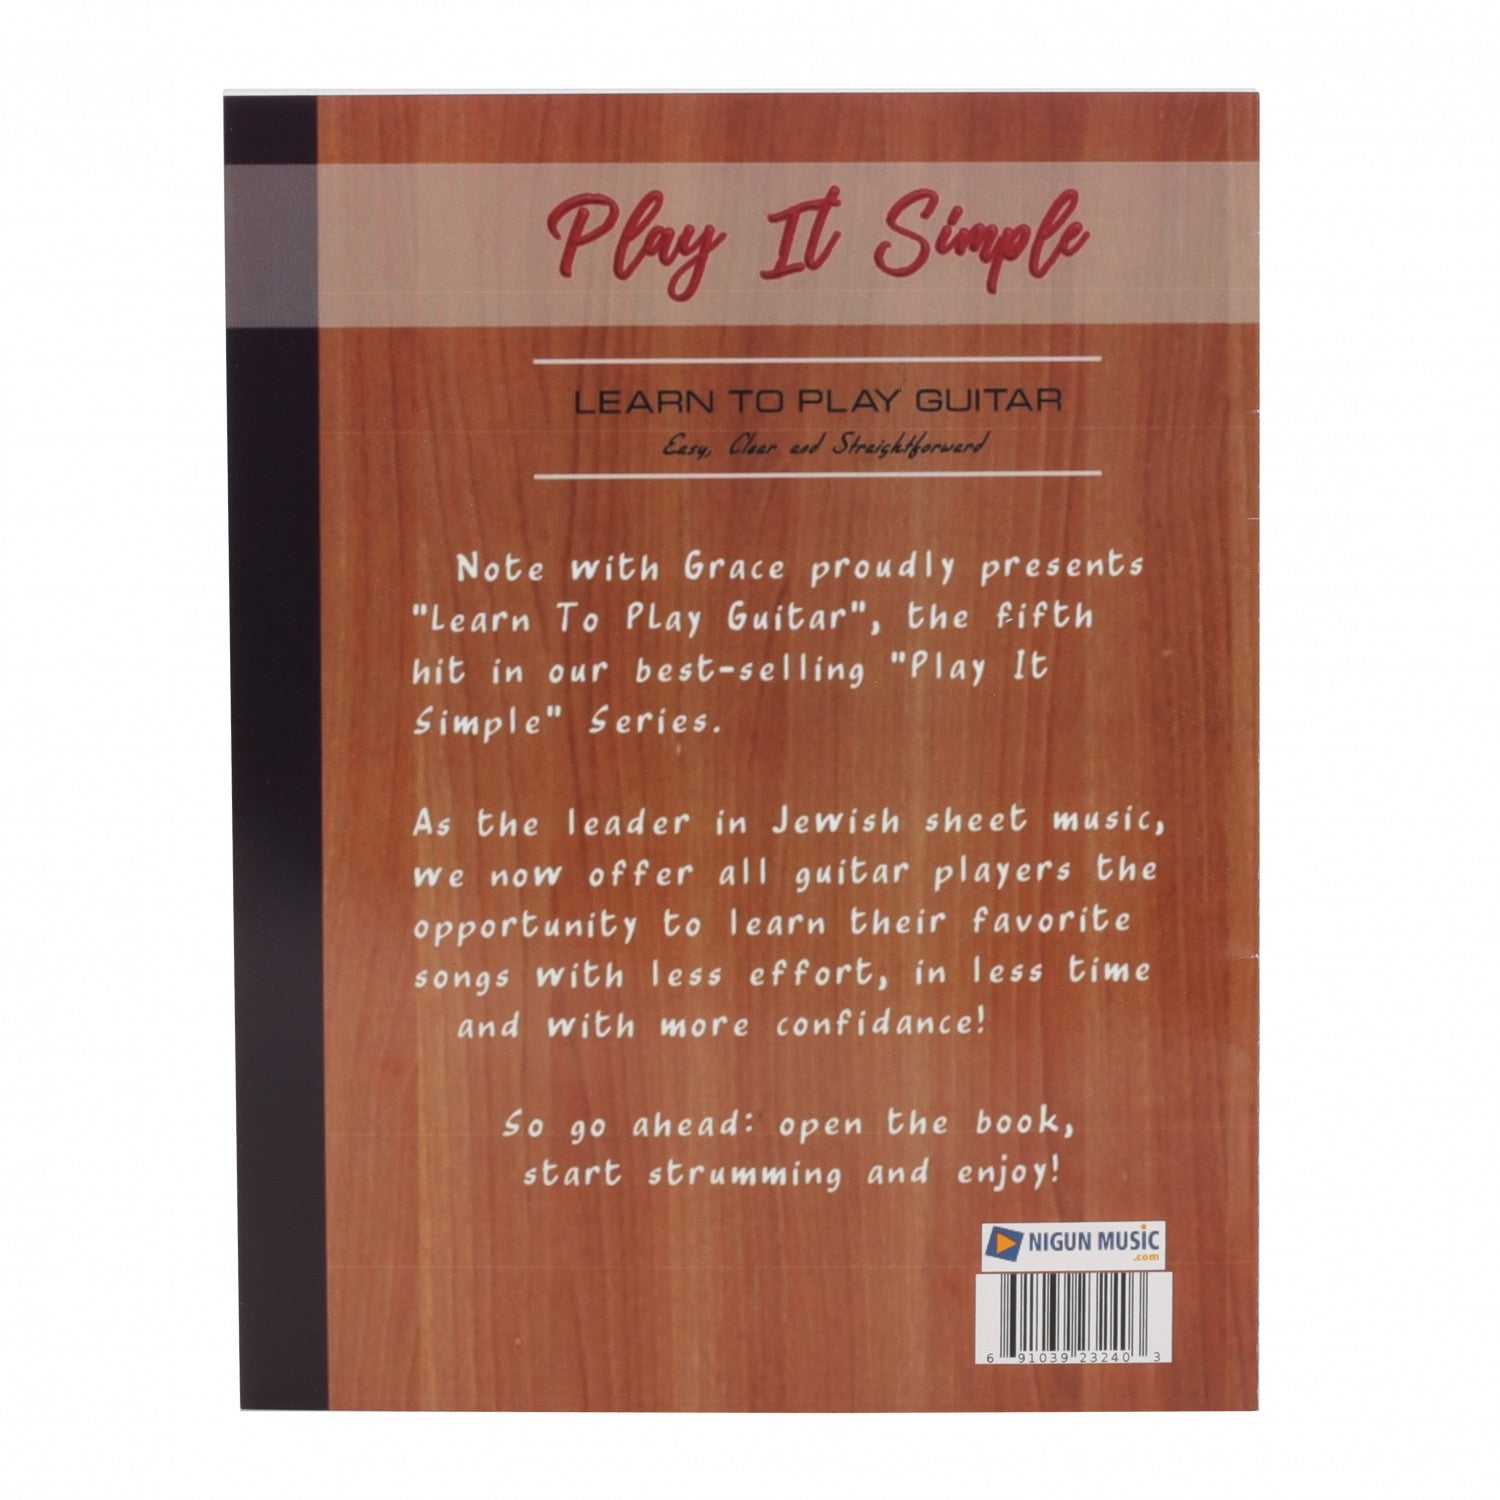 Play It Simple - Learn to Play Guitar (Book)